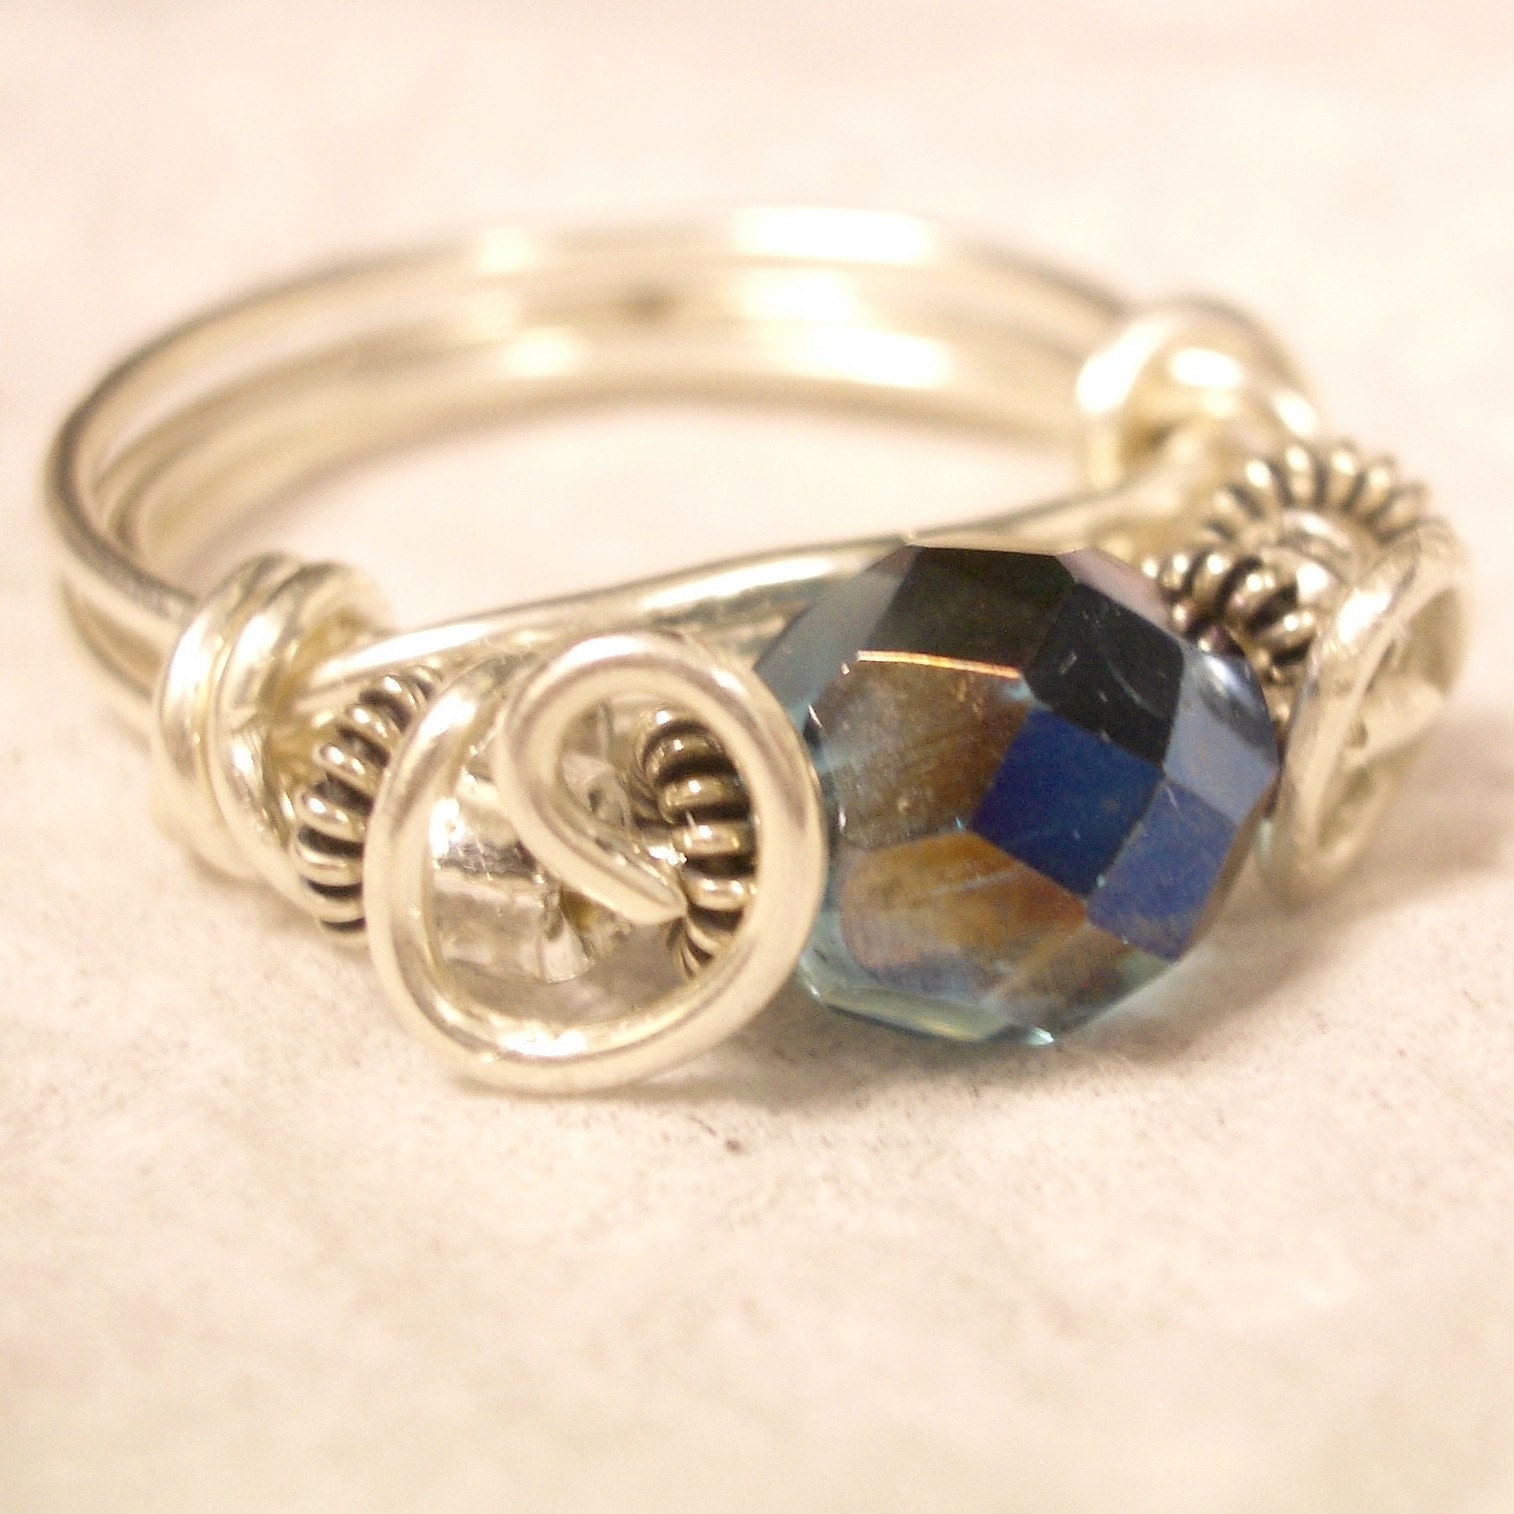 Multi-Faceted Blue Fire-polished Czech Ring in Sterling Silver - Size 6